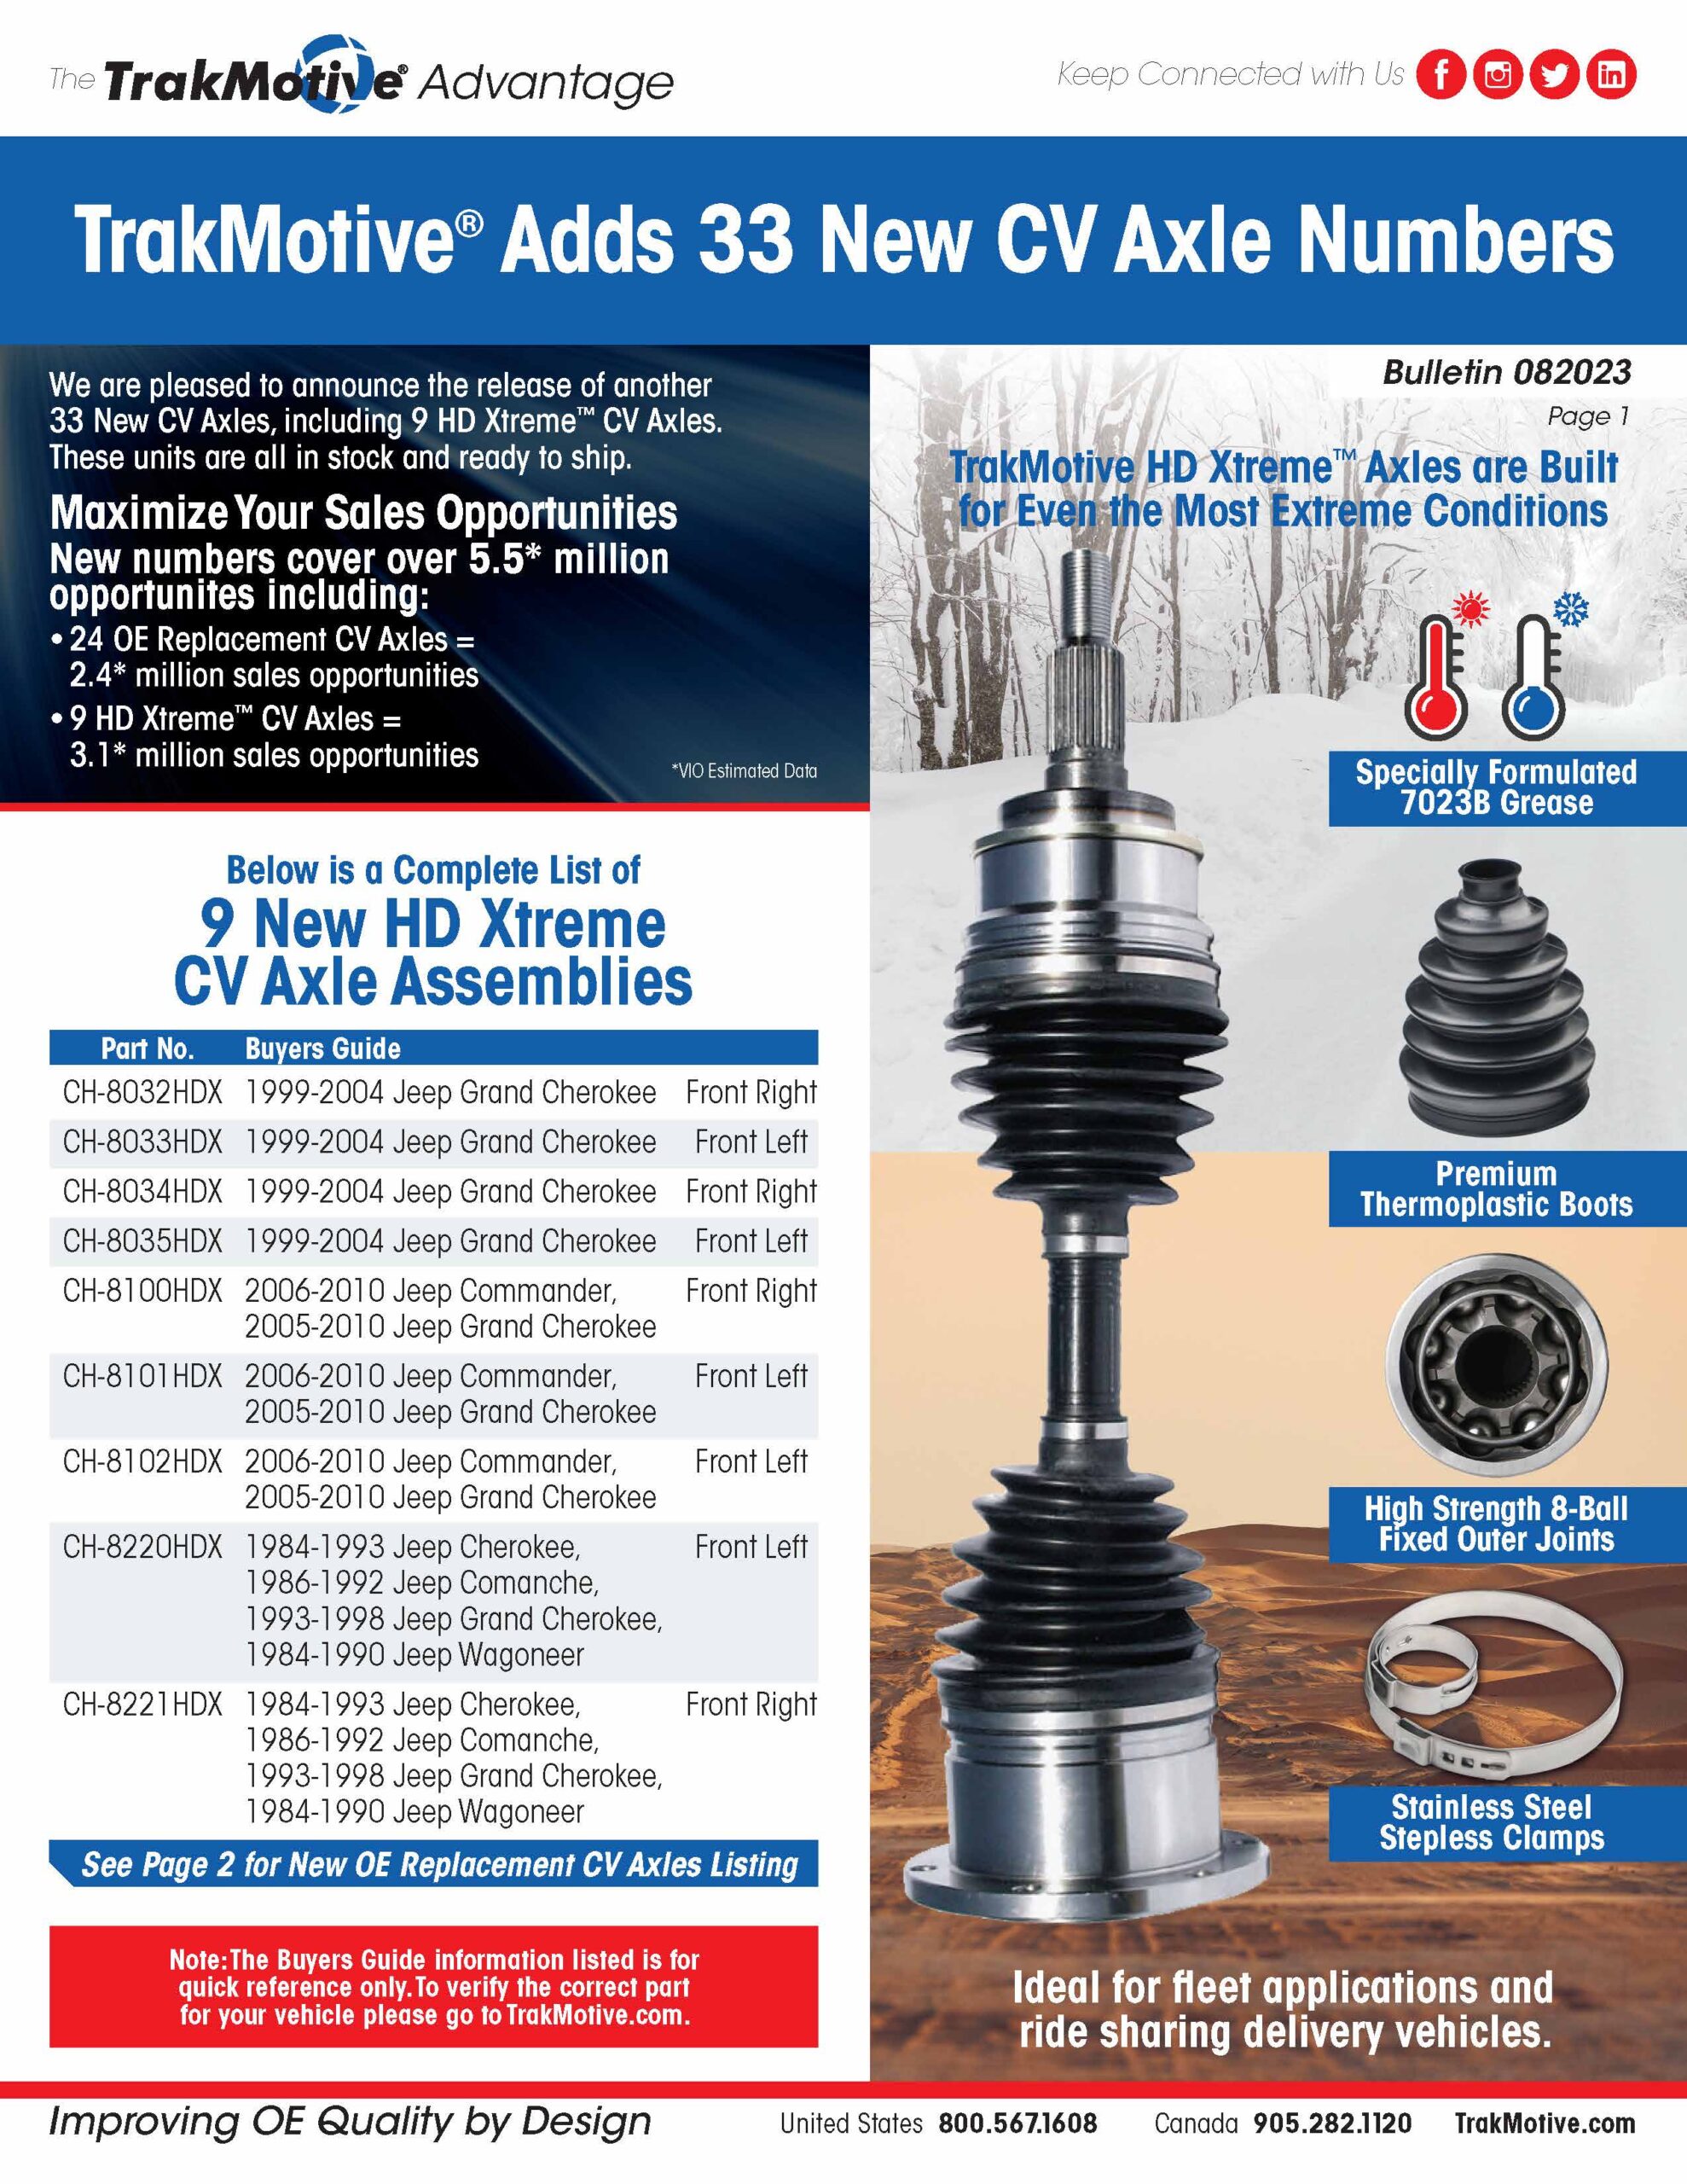 08/2023: TrakMotive Adds 33 New CV Axle Numbers